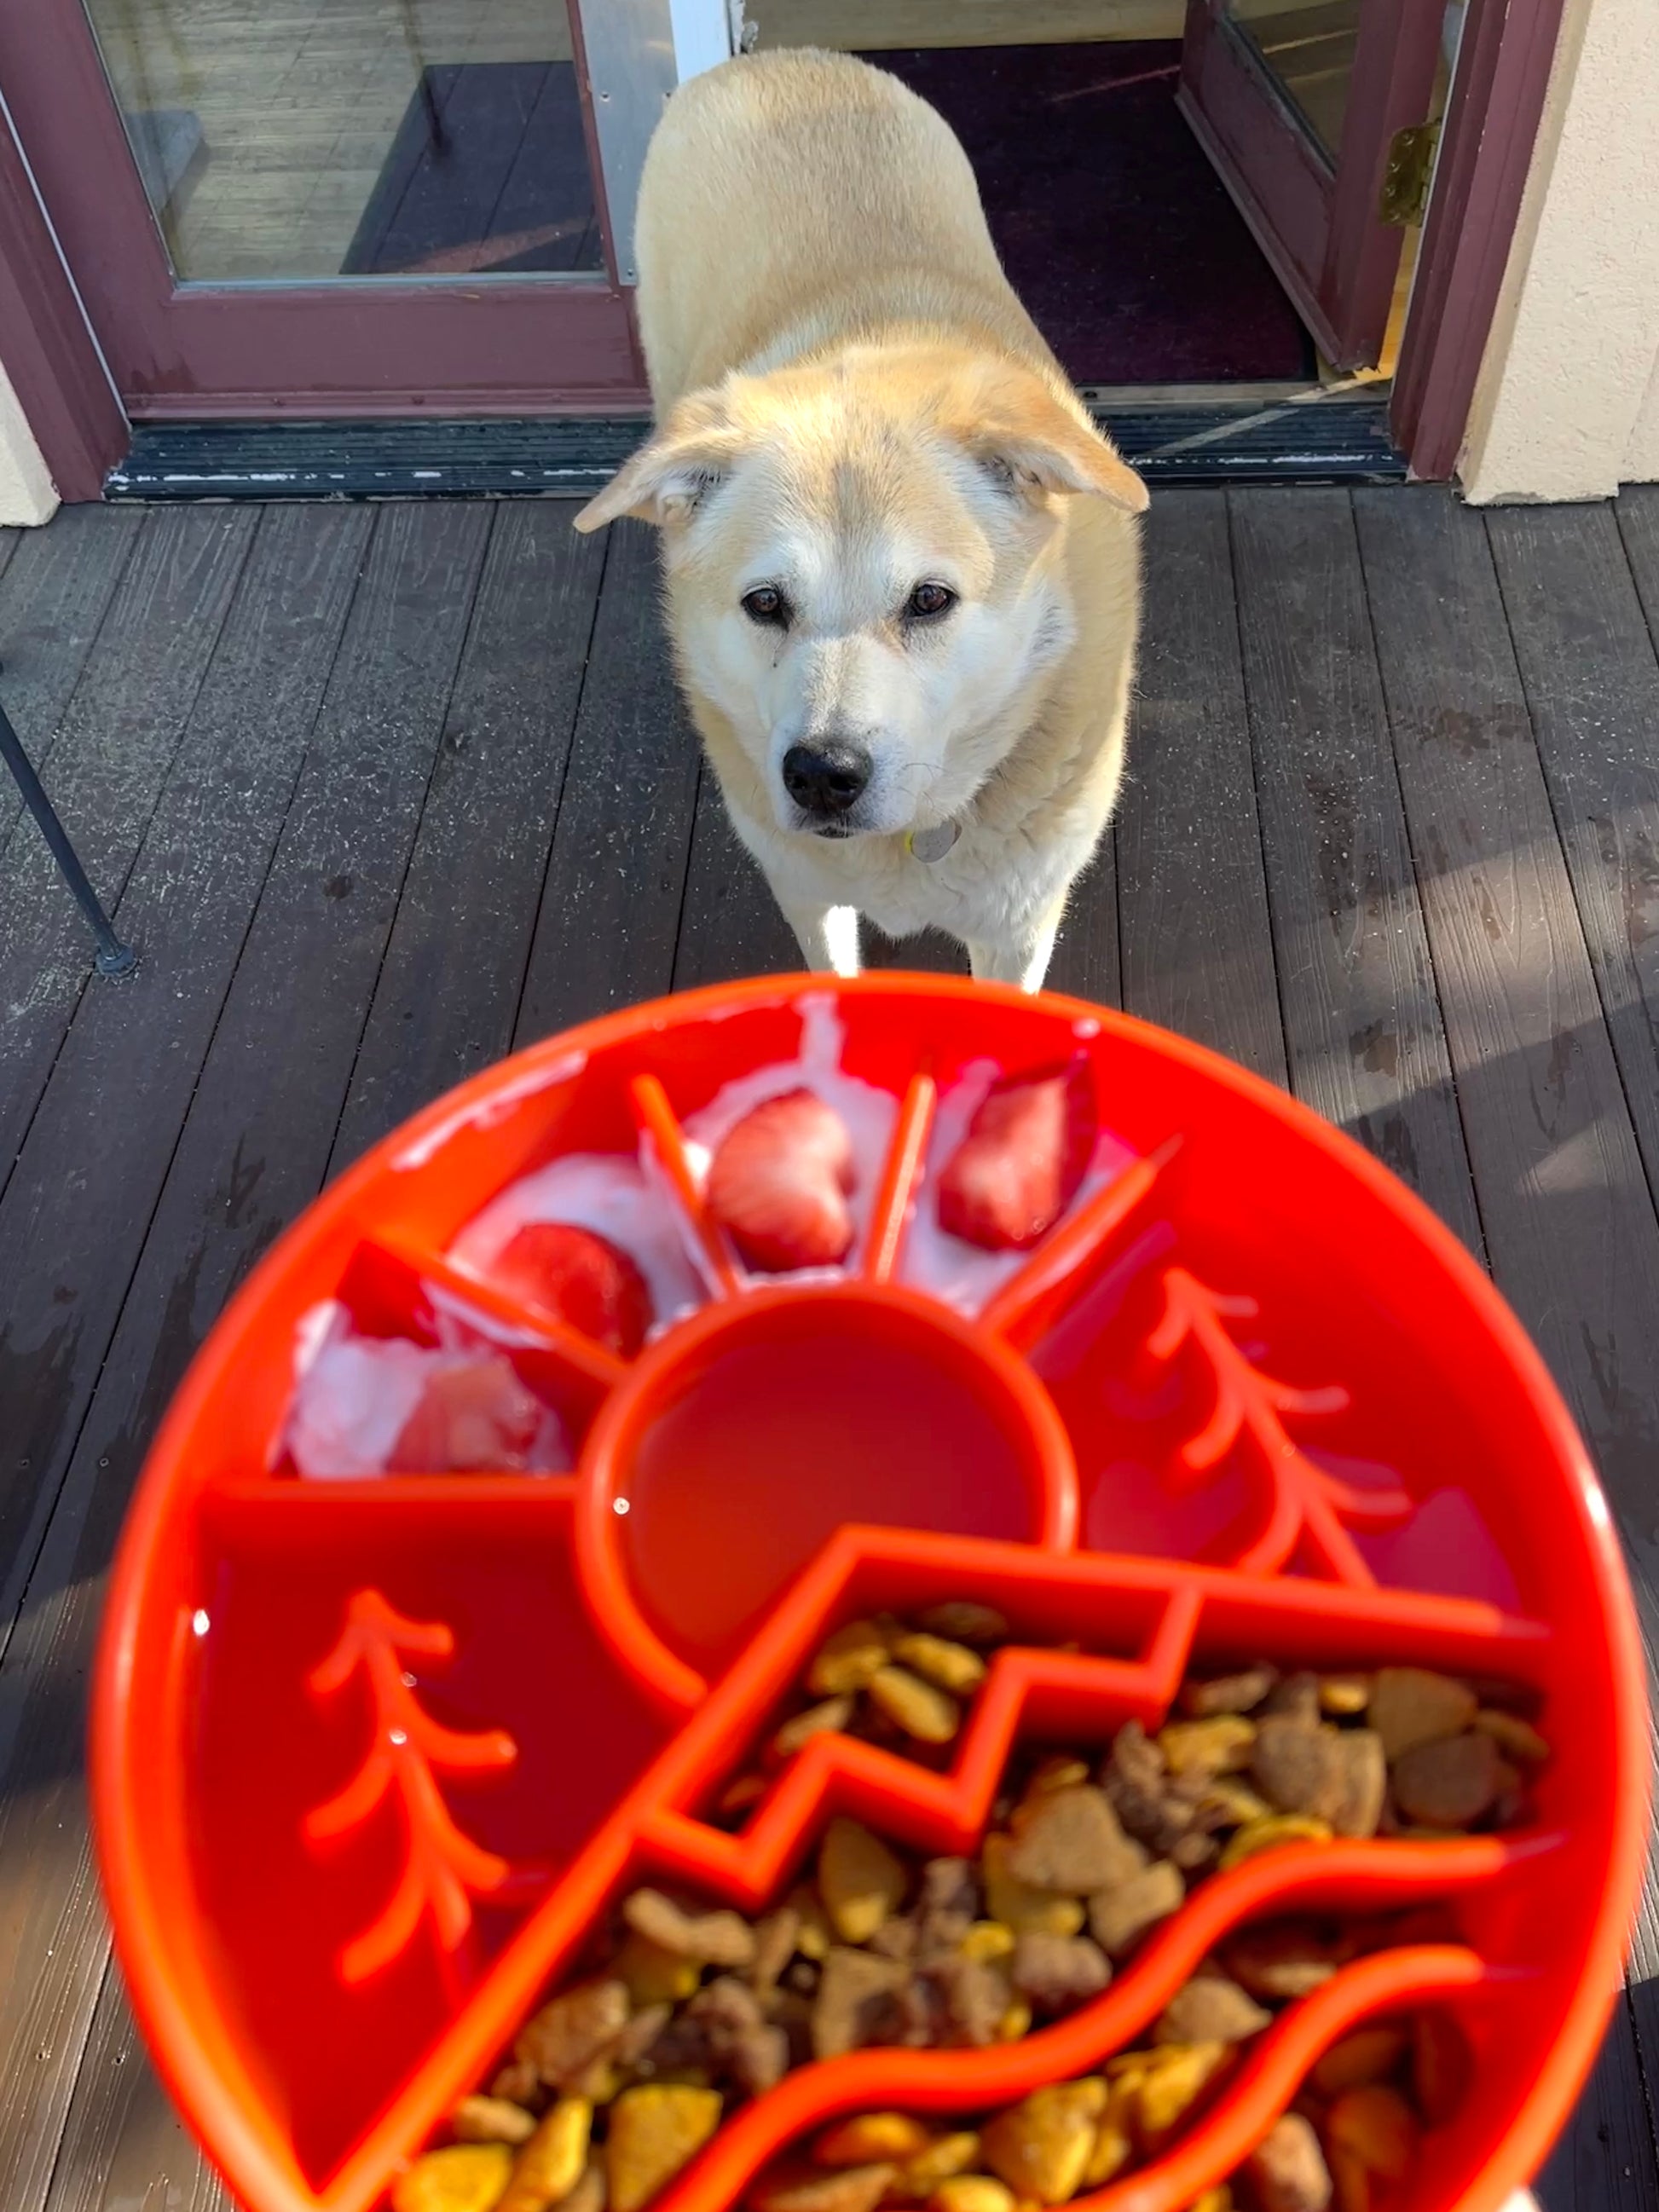 Snuffle Mat vs. Slow Feeder Dog Bowl: Which is Better?